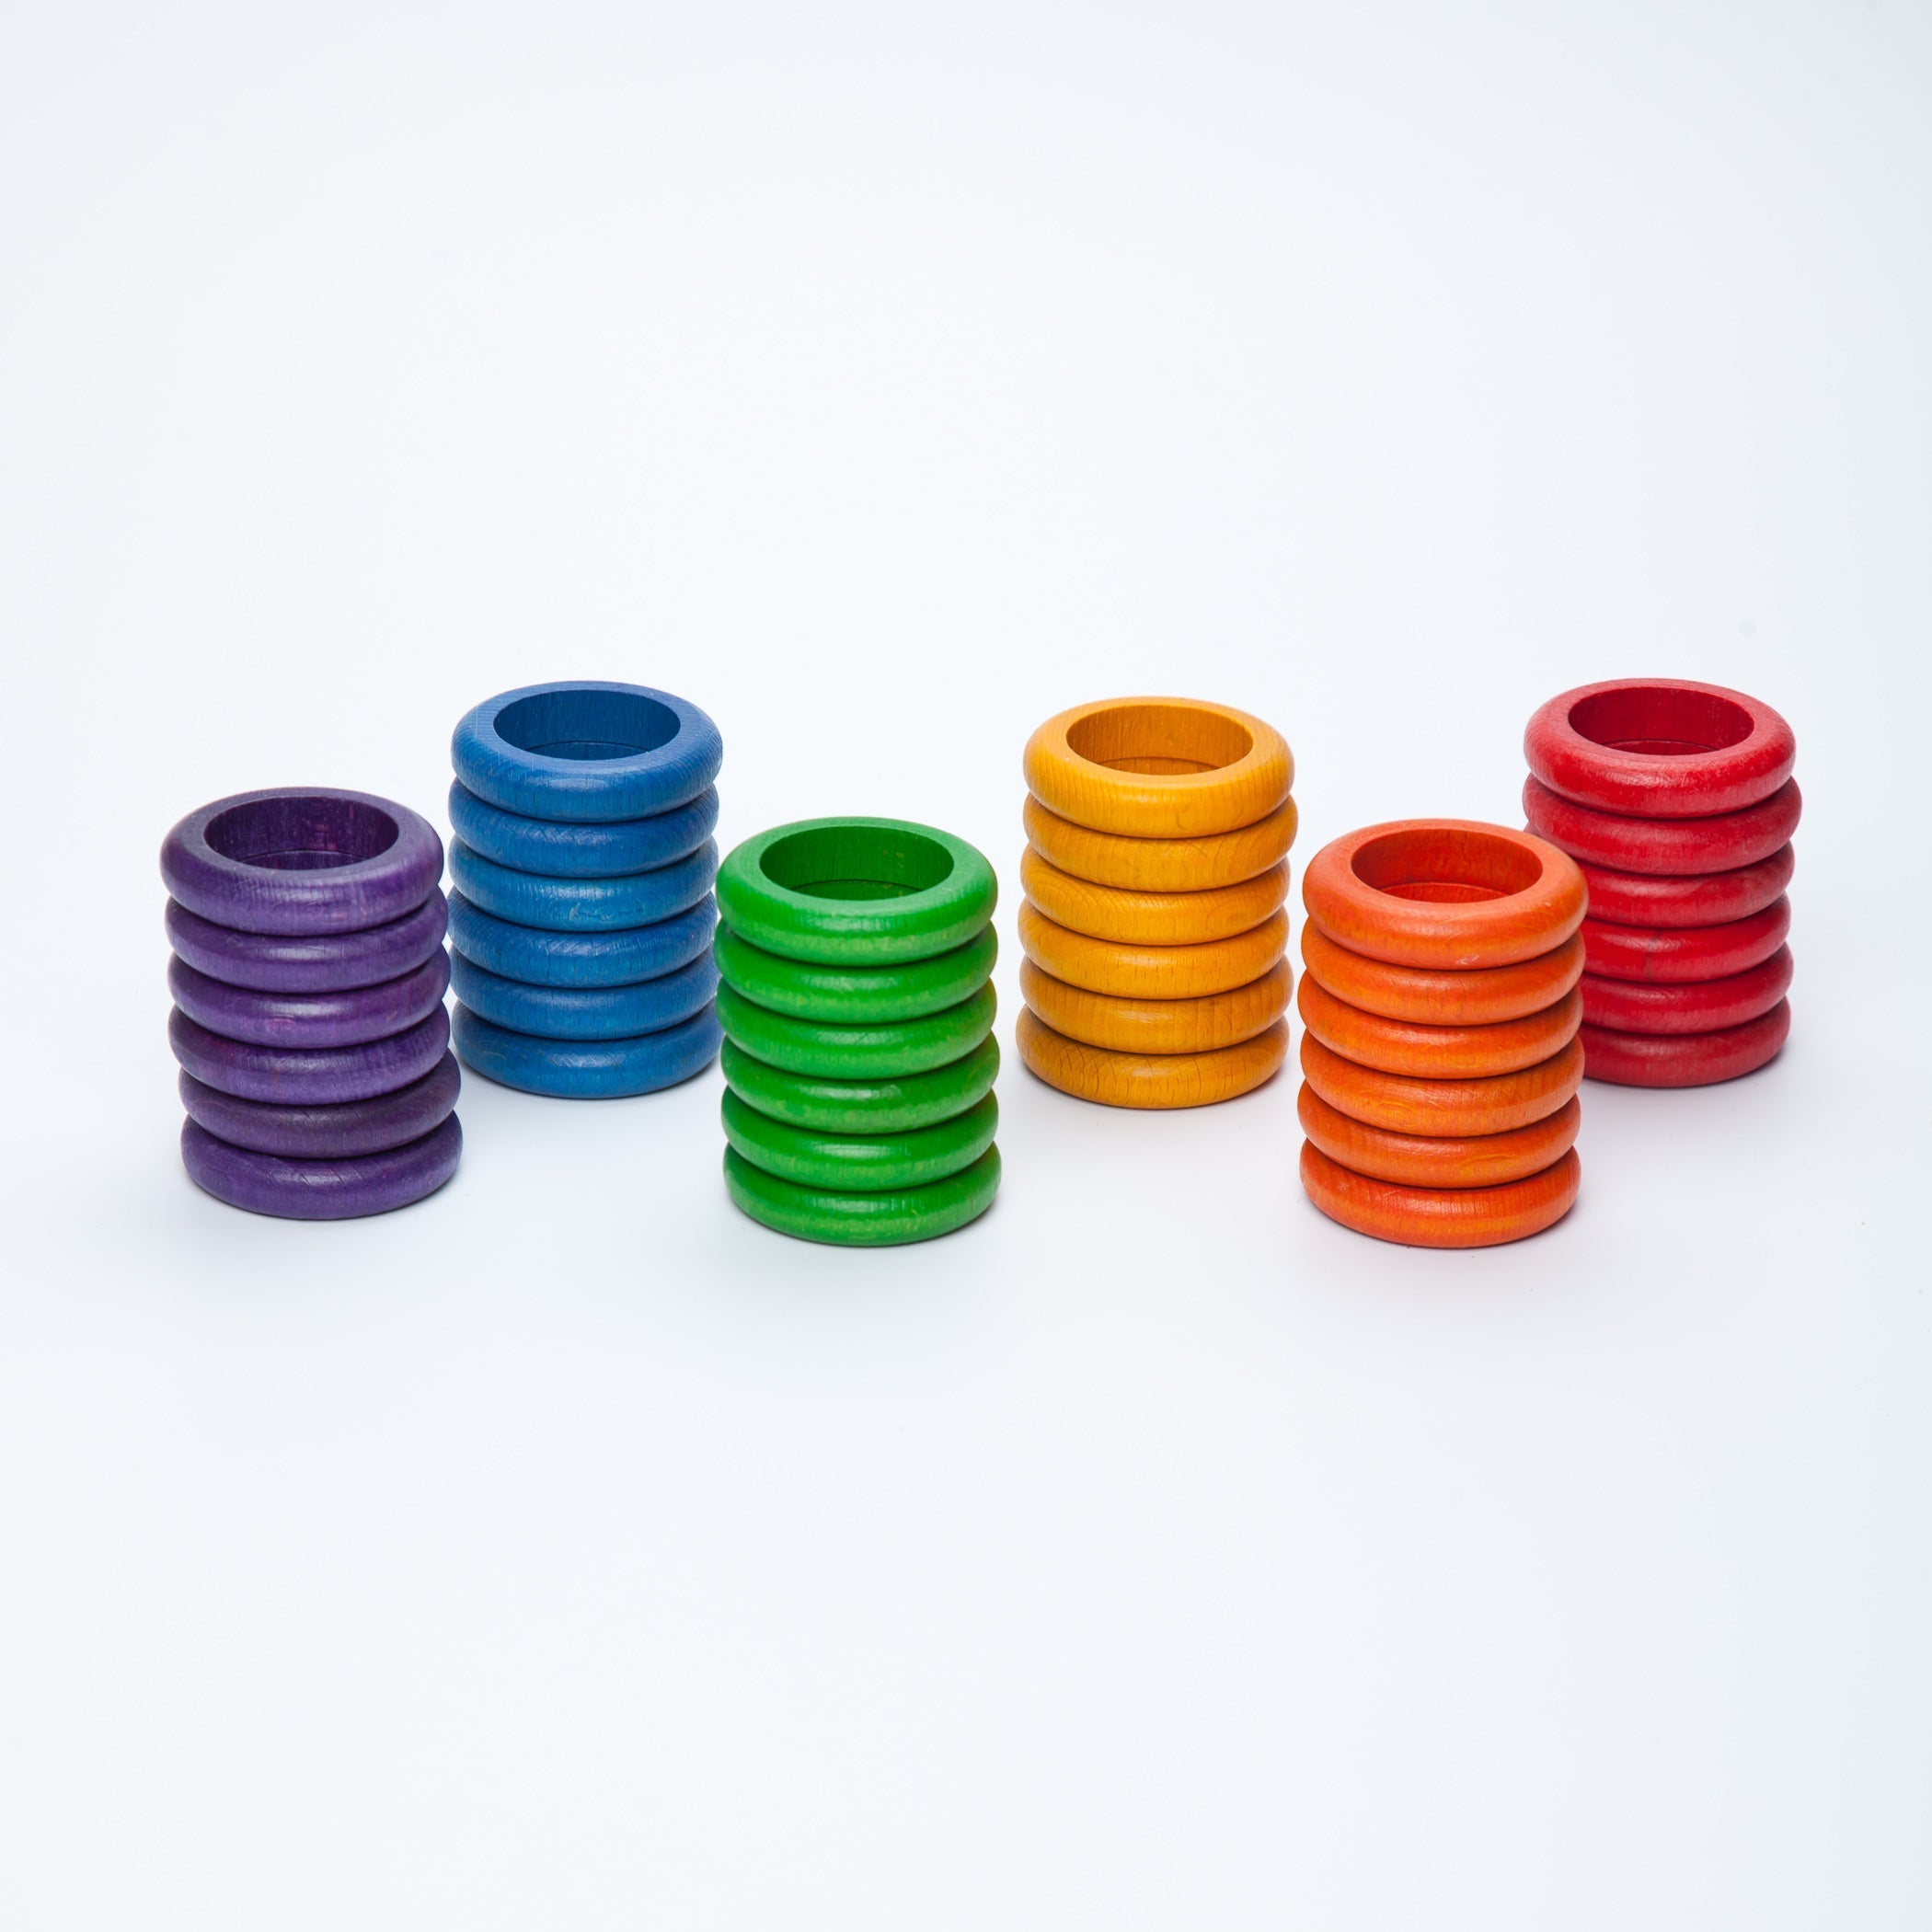 Grapat Coloured Rings - 36 pieces in 6 Rainbow Colours